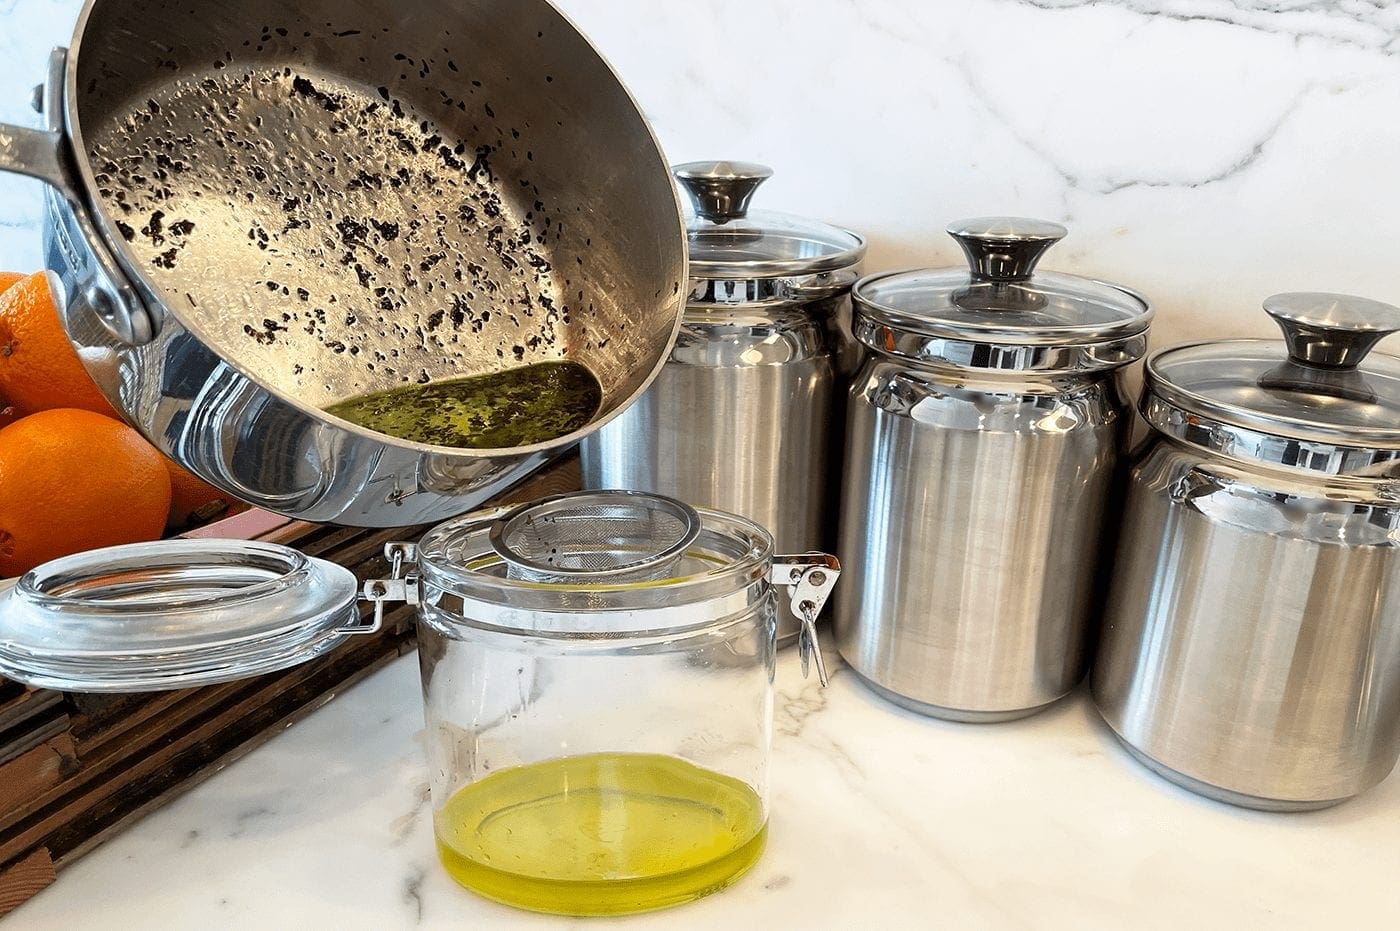 Strain your cannabutter with a tea strainer.